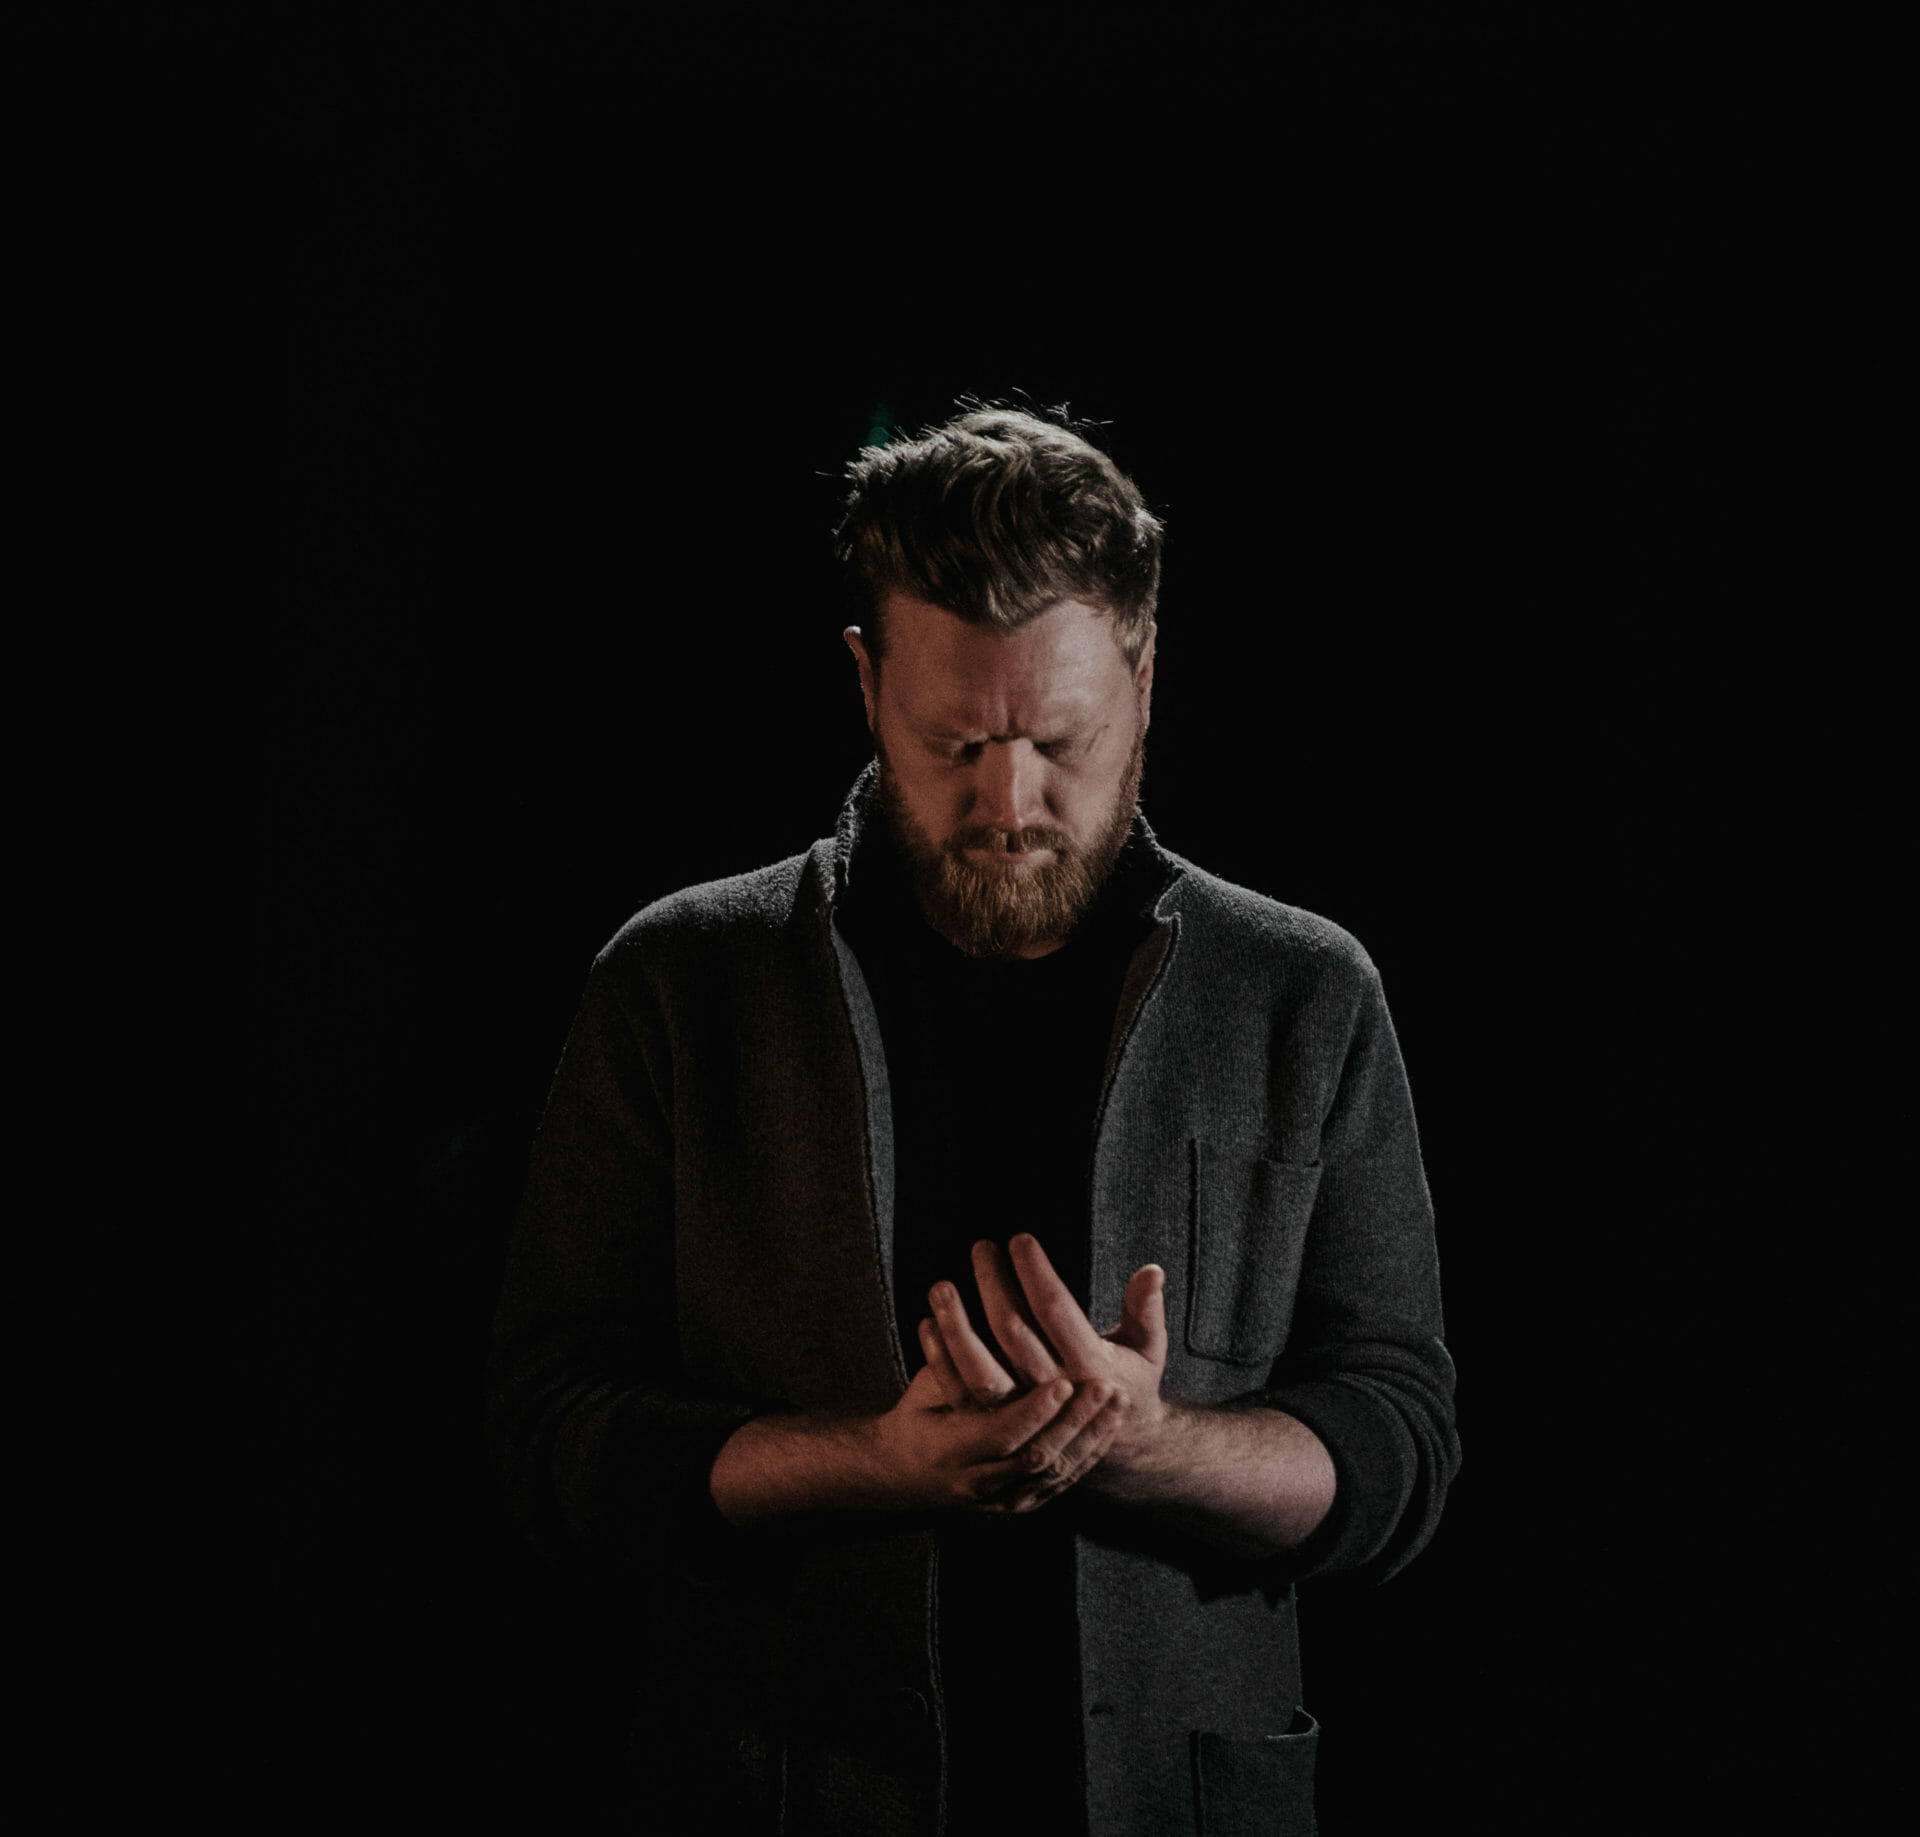 Video Premiere: Gareth Dunlop Shares Live Performance of “Sorrow”